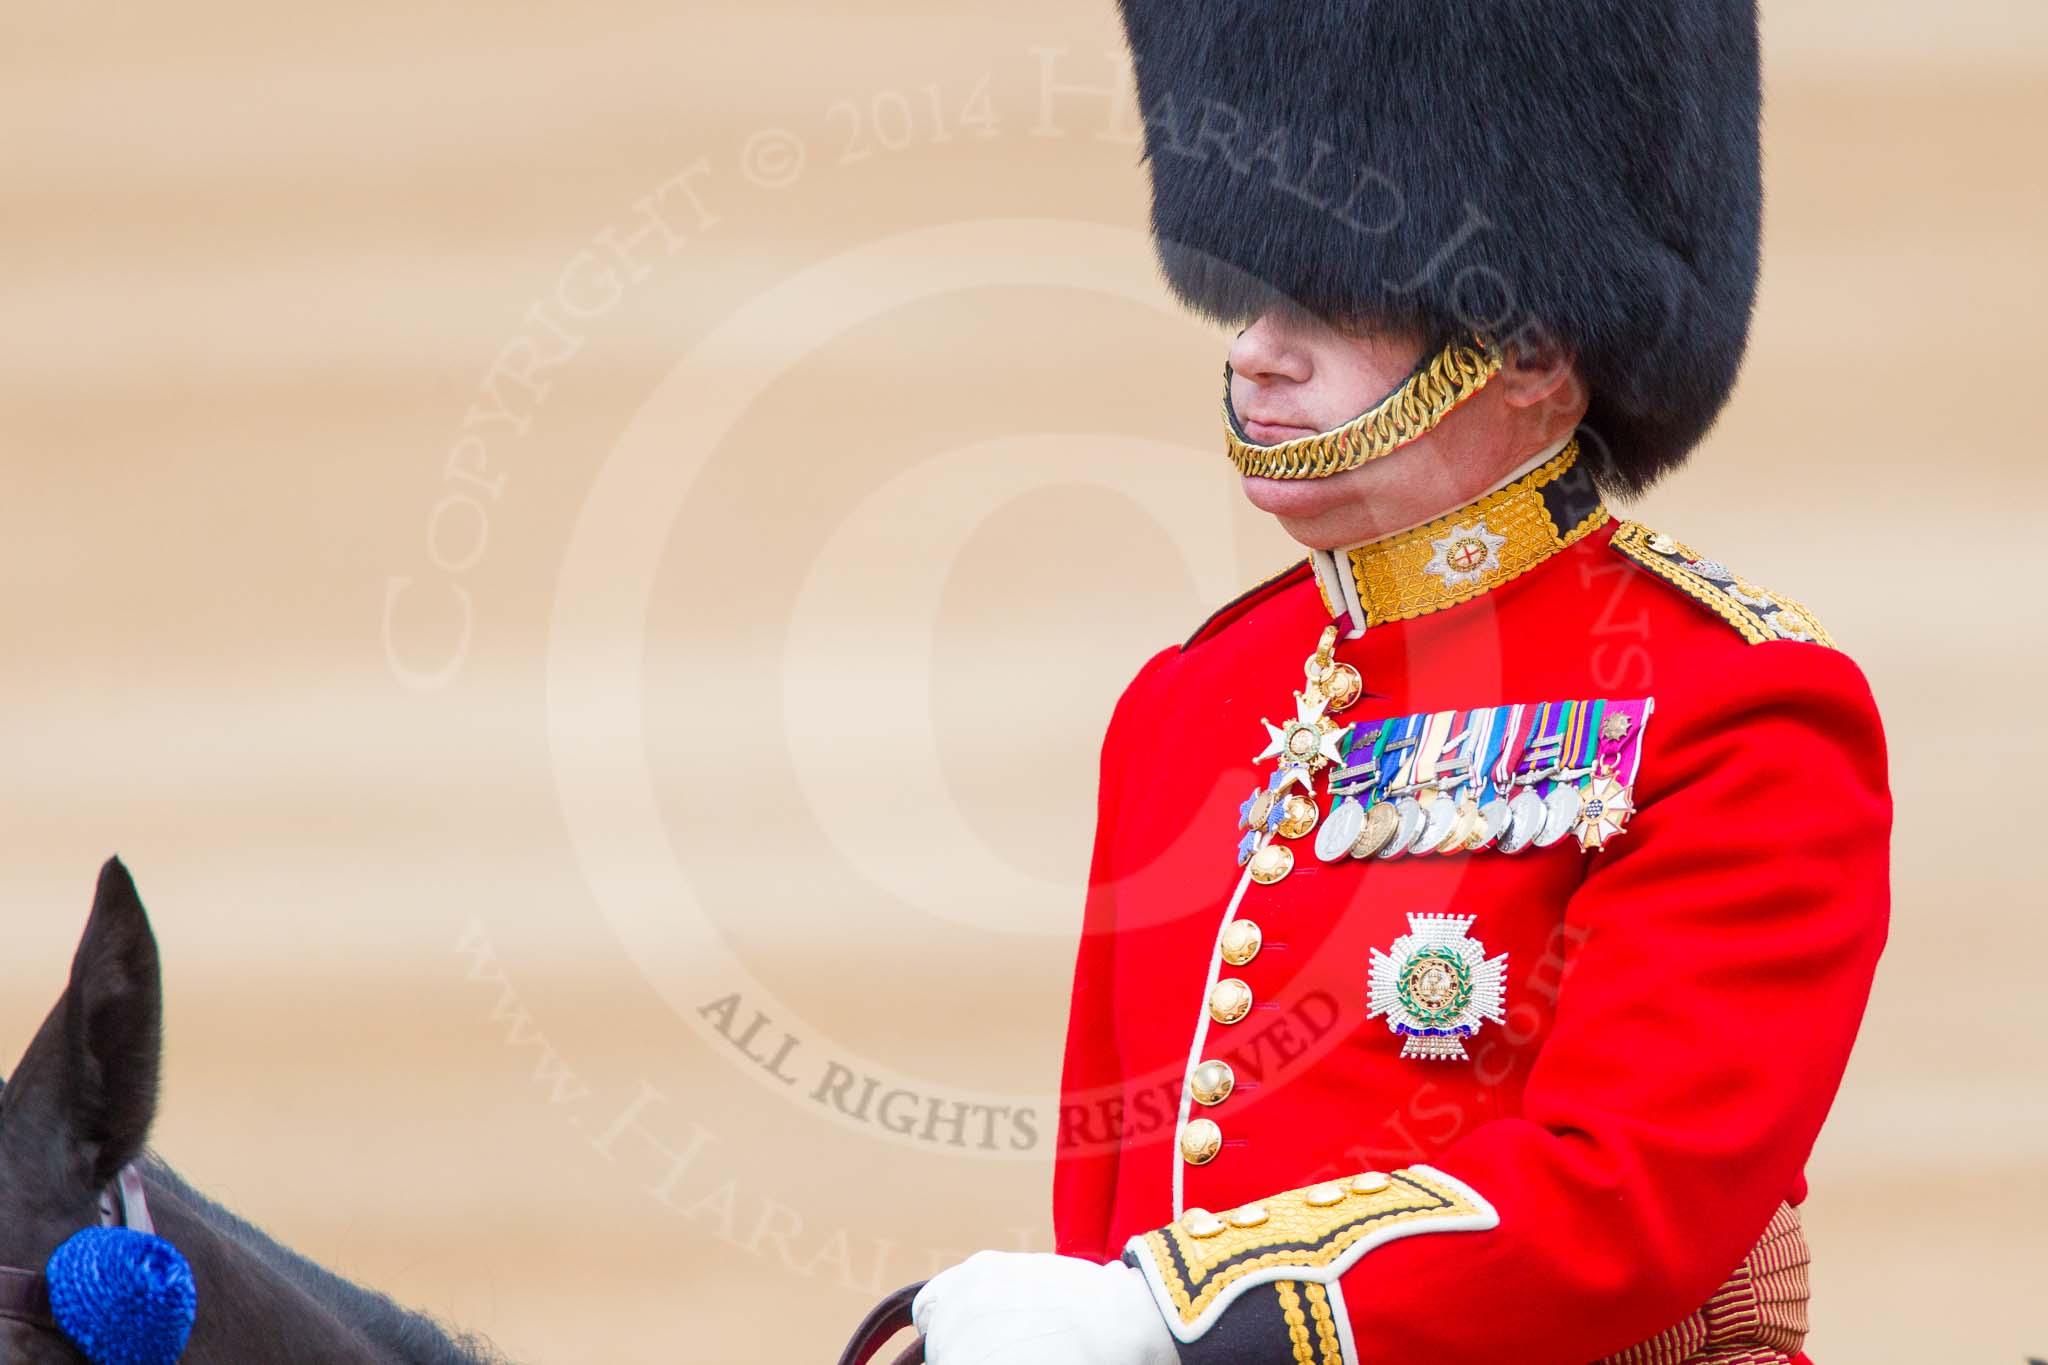 Trooping the Colour 2014.
Horse Guards Parade, Westminster,
London SW1A,

United Kingdom,
on 14 June 2014 at 11:03, image #392